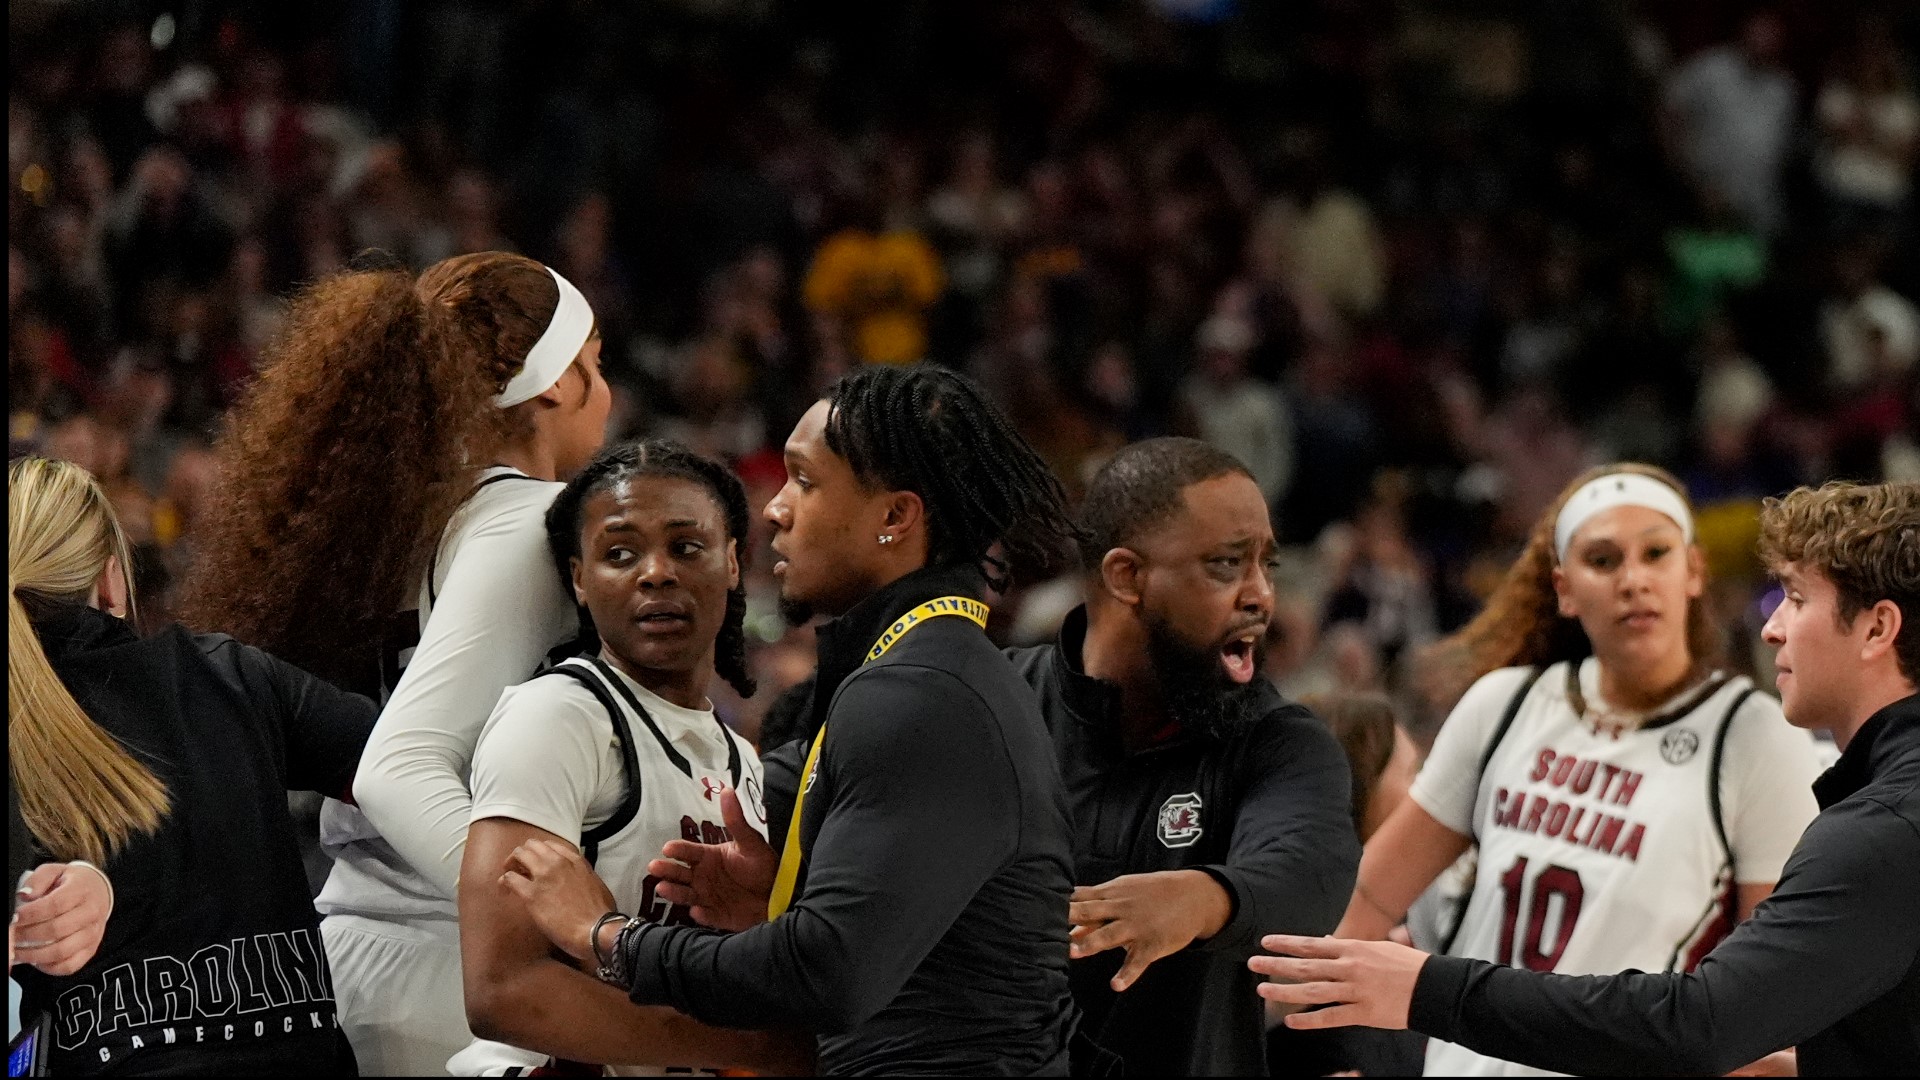 Late in the fourth quarter of the women's SEC Championship game, a fan jumped onto the court when players from LSU and South Carolina got into a scuffle.